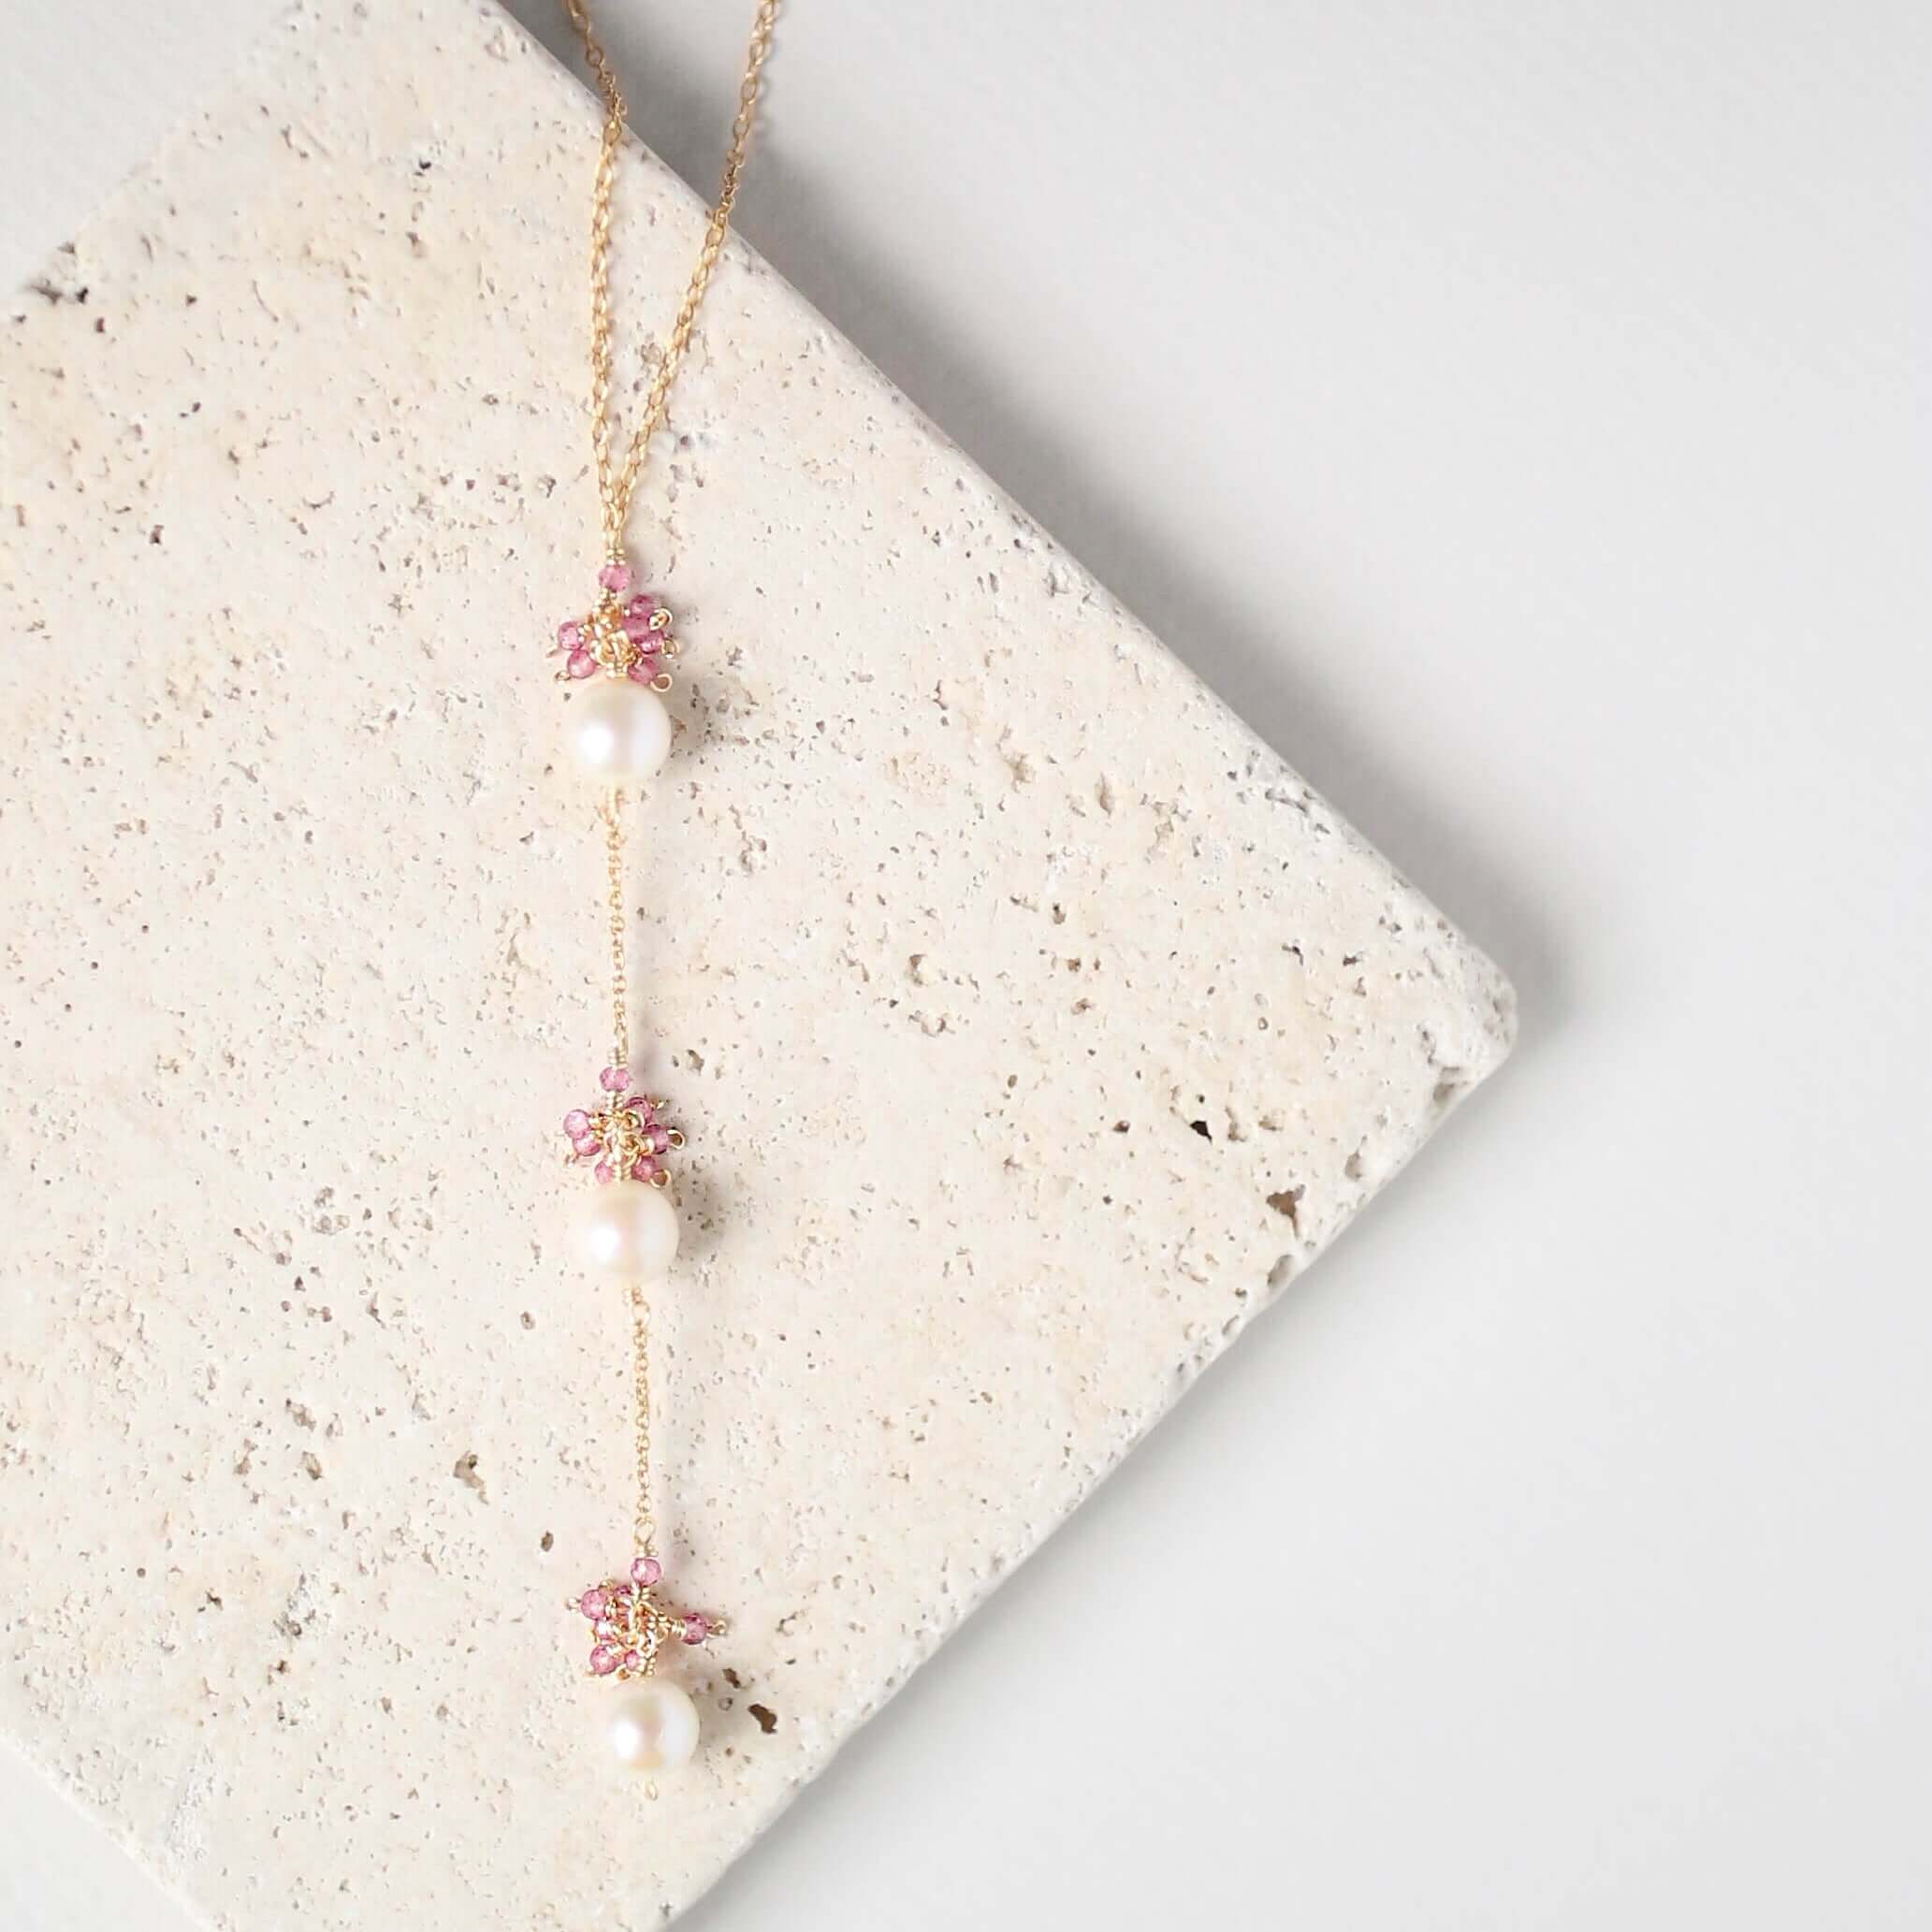 Gold plated Necklace with 3 white freshwater bead pearls paired with genuine pink Tourmaline quartz gemstones